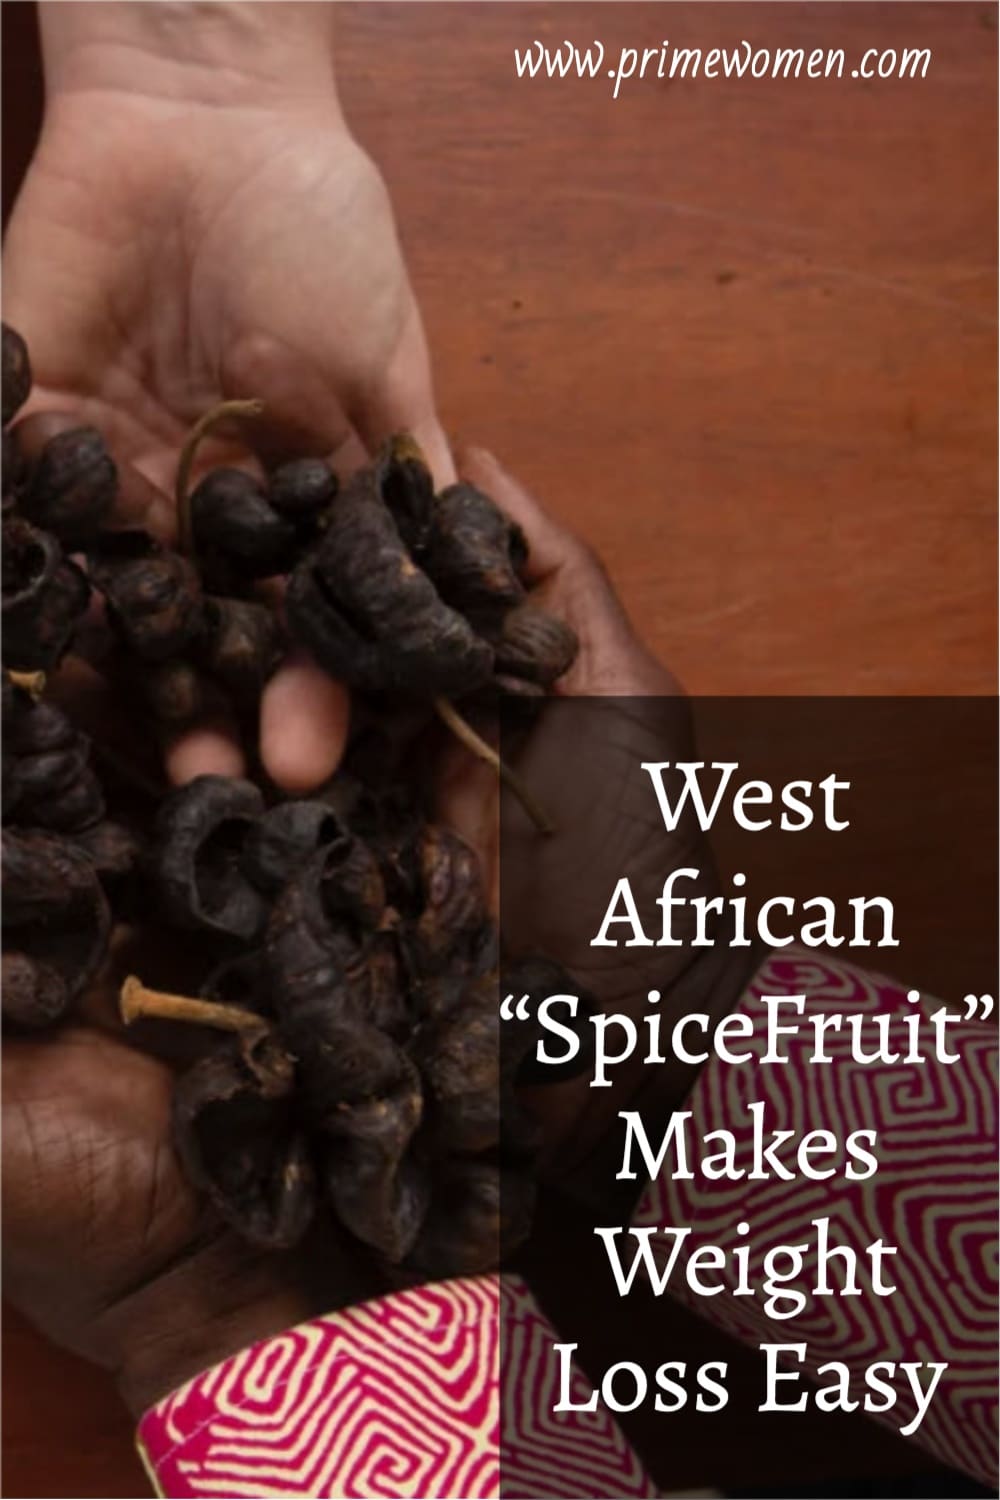 West-African-“SpiceFruit”-Makes-Weight-Loss-Easy